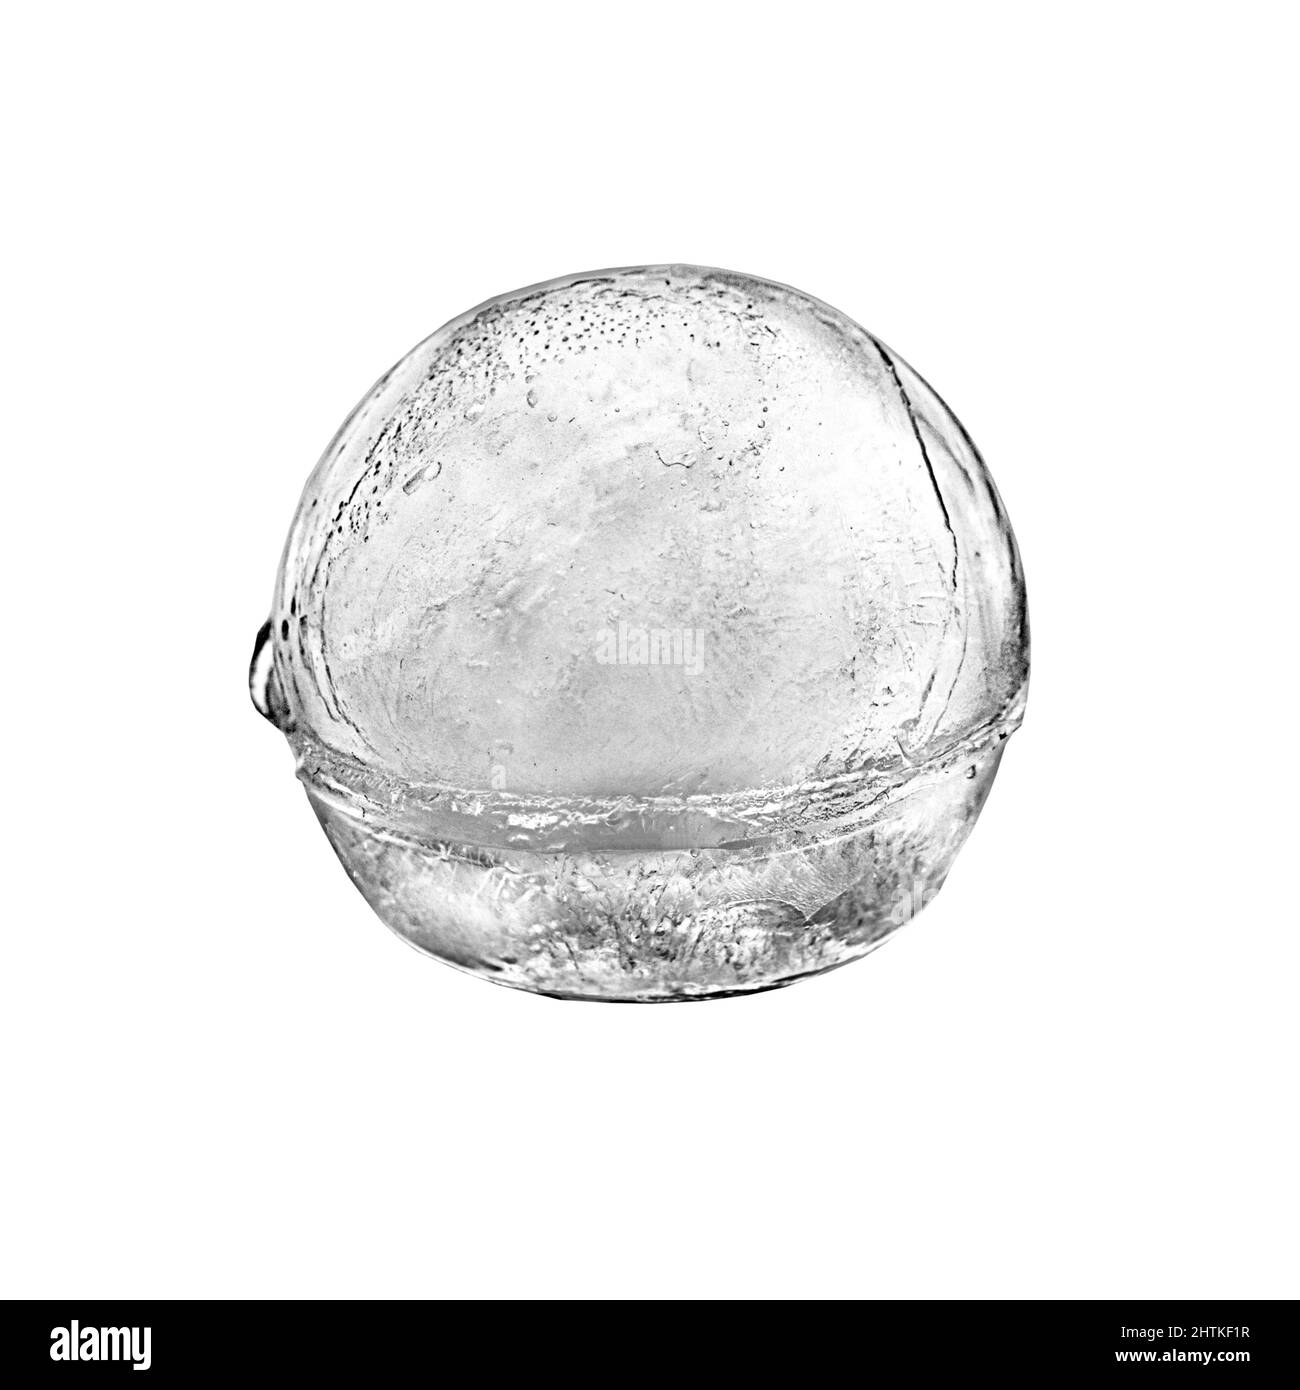 Round Spherical Ice Cube Ball In A Cocktail Glass With Unique Rim Lighting  Against A Black Background With An Alcoholic Beverage Being Poured Into It  Stock Photo - Download Image Now - iStock